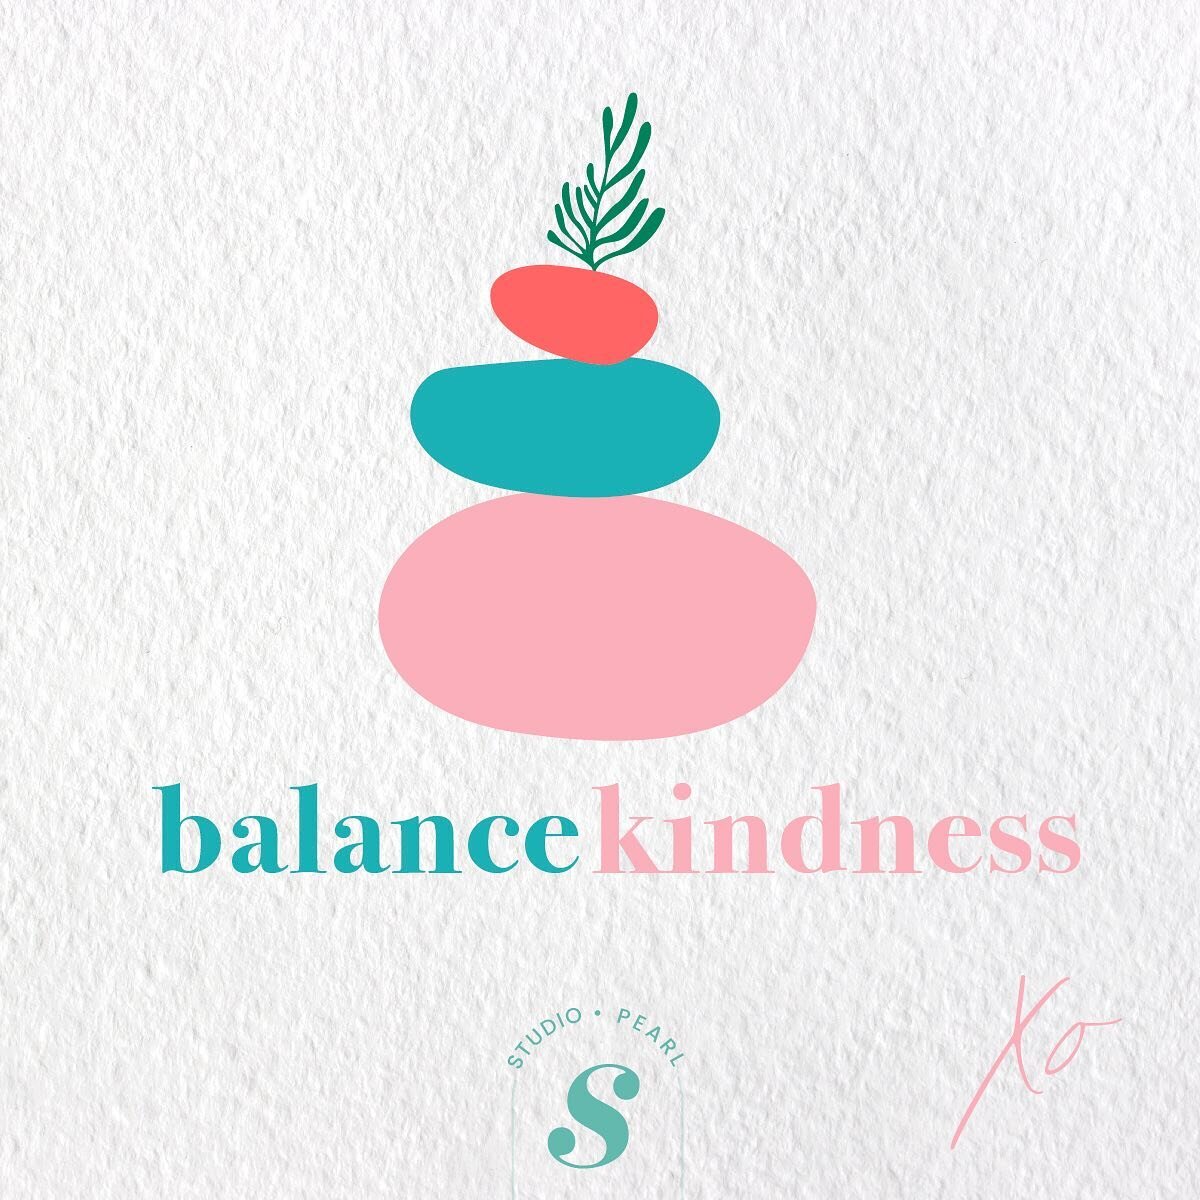 Today everything has seemed out of balance. Lockdowns, vaccines, riots and earthquakes. I hope you find your balance today, and some kindness. Personally, I'm finally taking a break from the screen and heading out for a spring walk... 🌱

#studio_pea